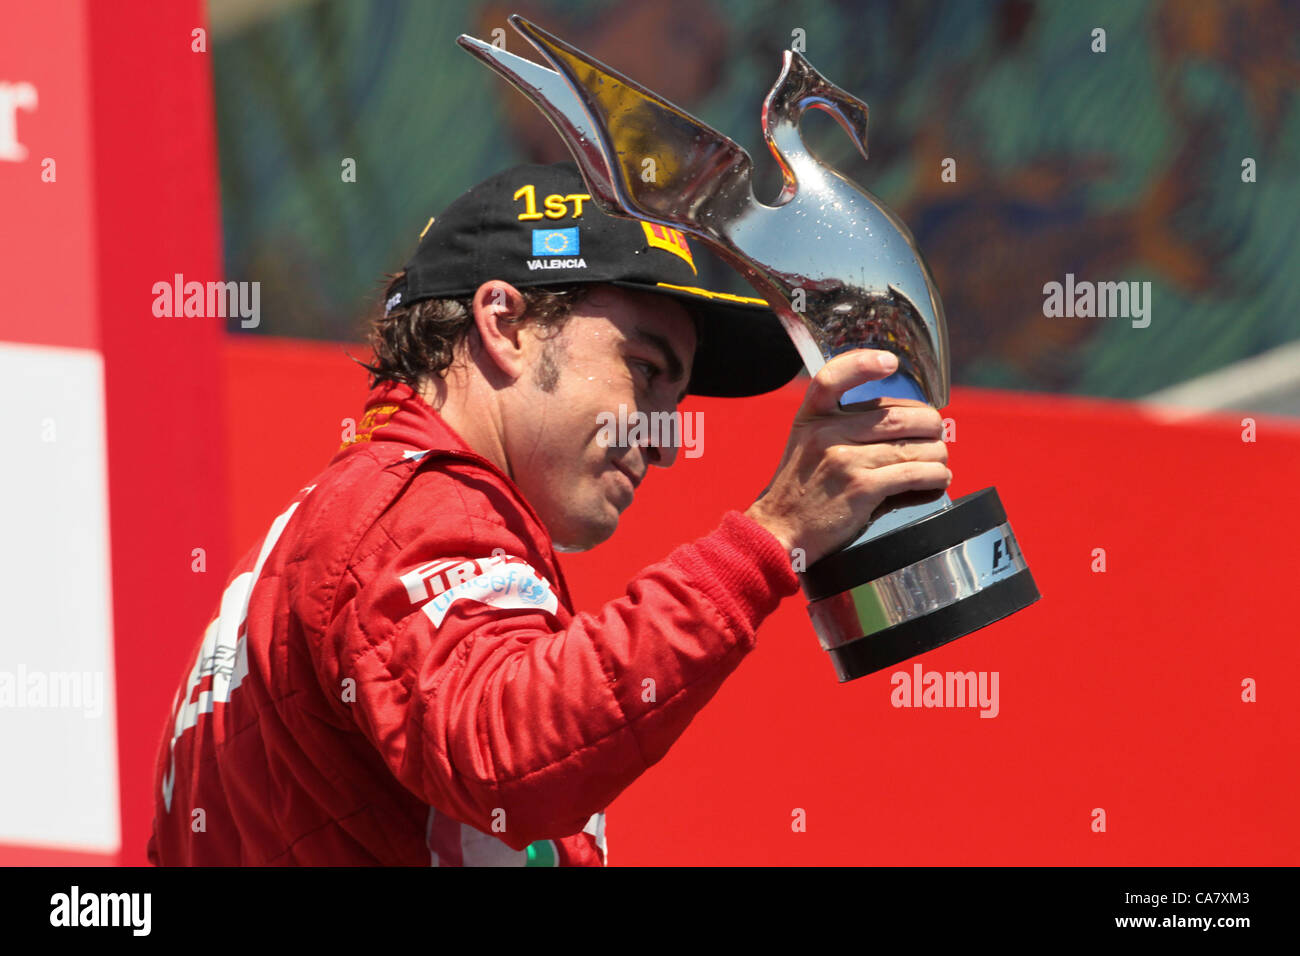 24.06.2012.  Valencia. Spain. 2012 Grand Prix Europe Valencia 2012 Formula 1 Grand Prix Europe Valencia 2012 Fernando Alonso on the podium with his trophy as he takes 1st place at the Valencia GP Stock Photo